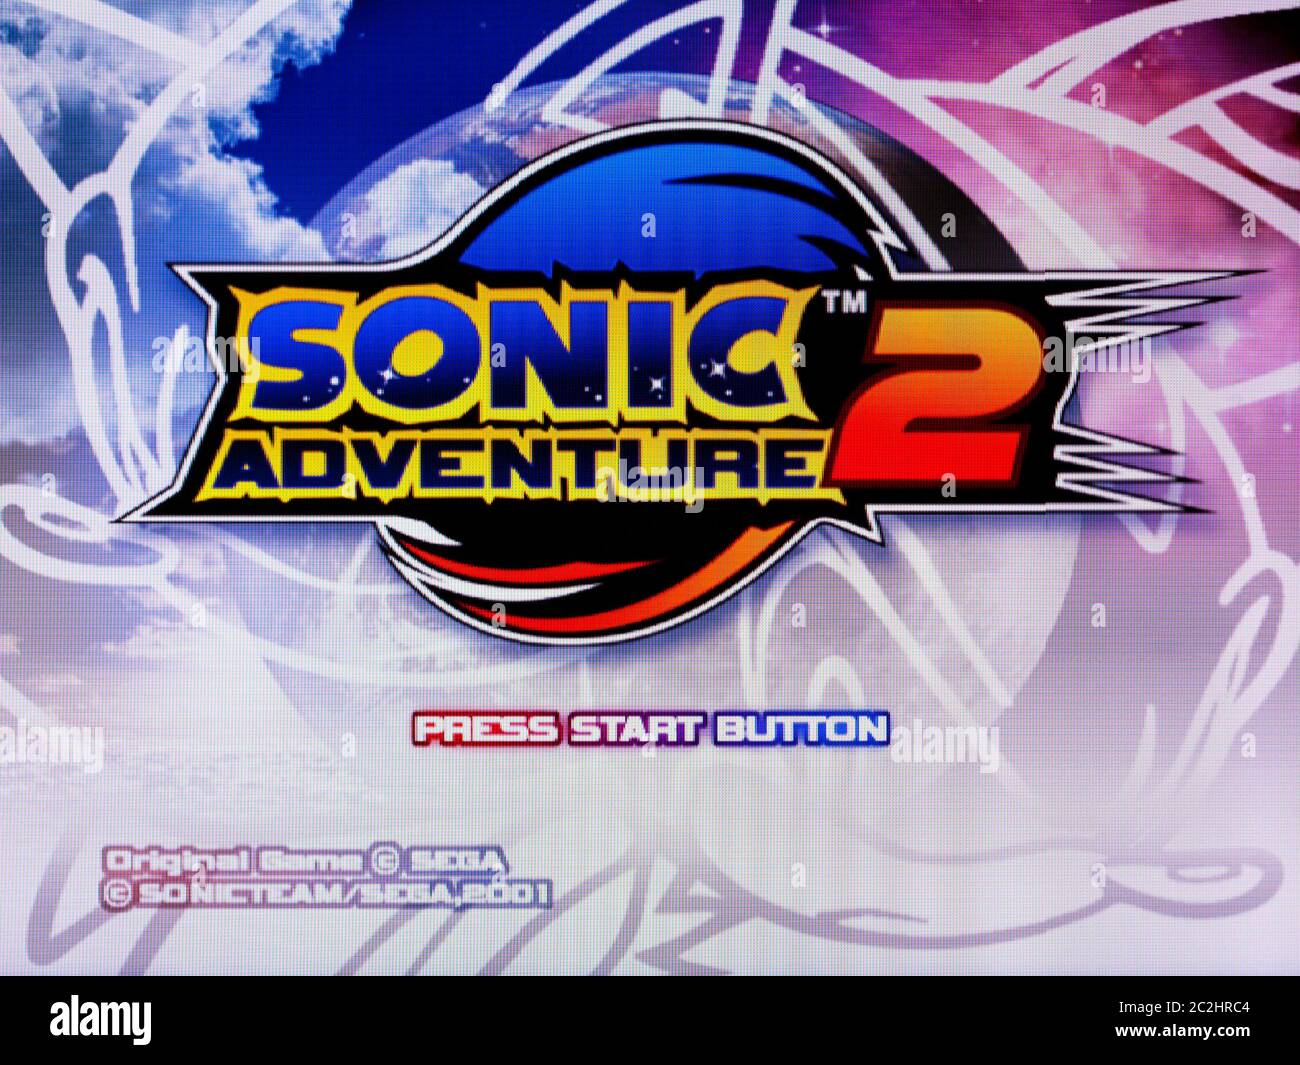 Sonic Adventure 2 - Sega Dreamcast Videogame - Editorial use only Stock Photo